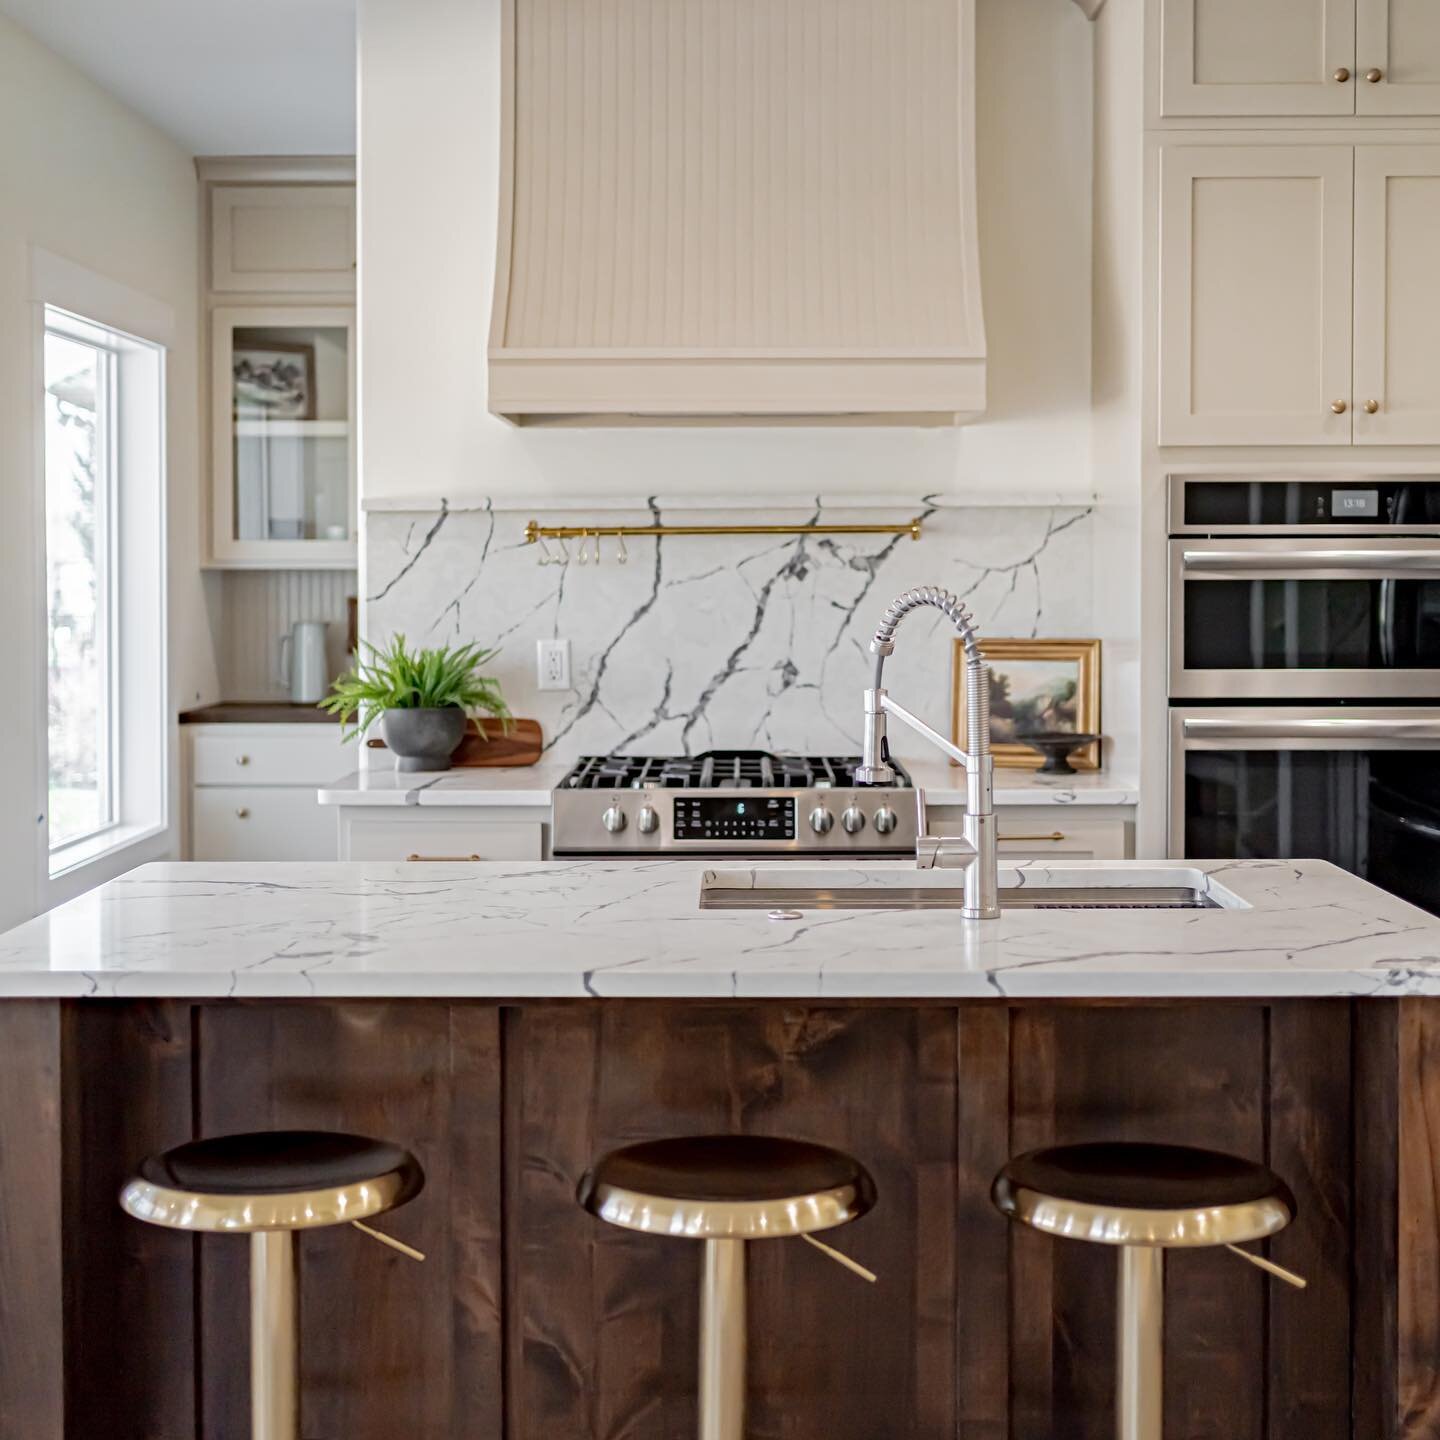 These barstools were the perfect touch to this kitchen. The gold really plays off the gold hardware on the cabinets And we are here for it 🙌🏼

#spring #idaho #idahome #newconstruction #homedecorating #homedecorideas #staging #realestate #homedecor 